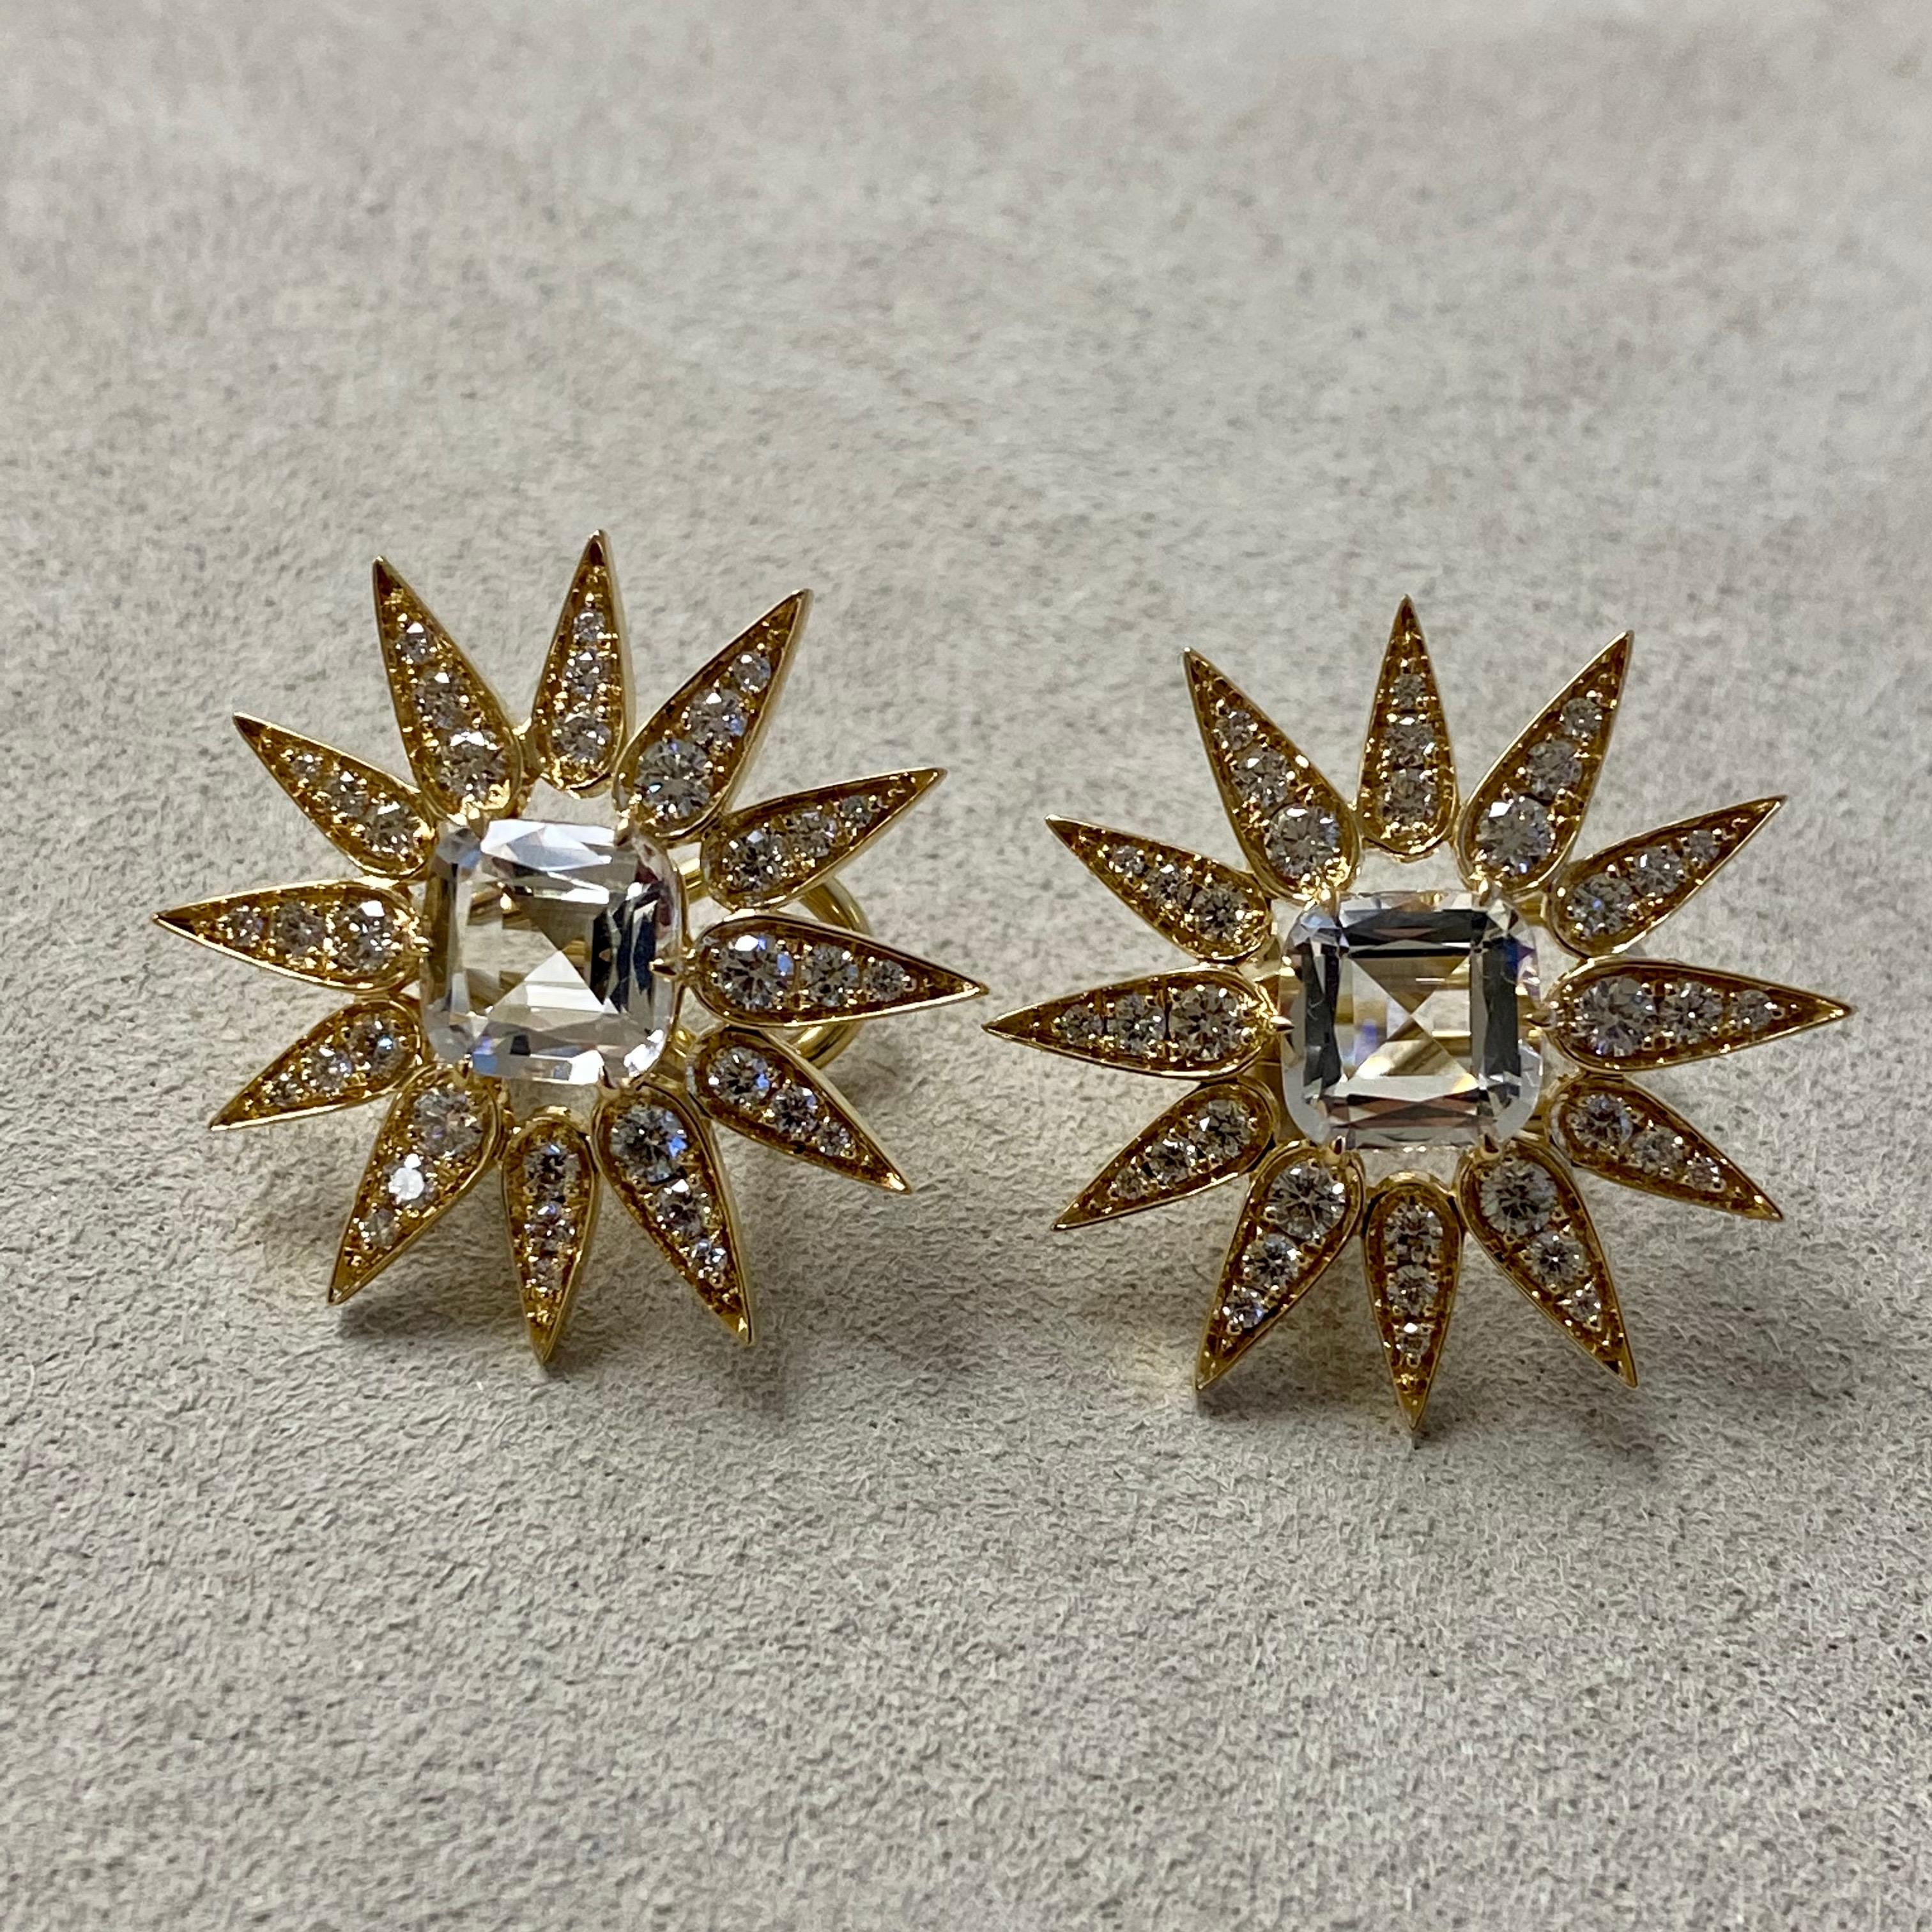 Created in 18 karat yellow gold
Rock Crystal 2.5 carats approx.
Diamonds 1.0 carat approx.
Omega clip-backs & posts
Limited Edition

Forged from 18 karat yellow gold, these limited edition earrings feature an approximate 2.5 carat Rock Crystal and